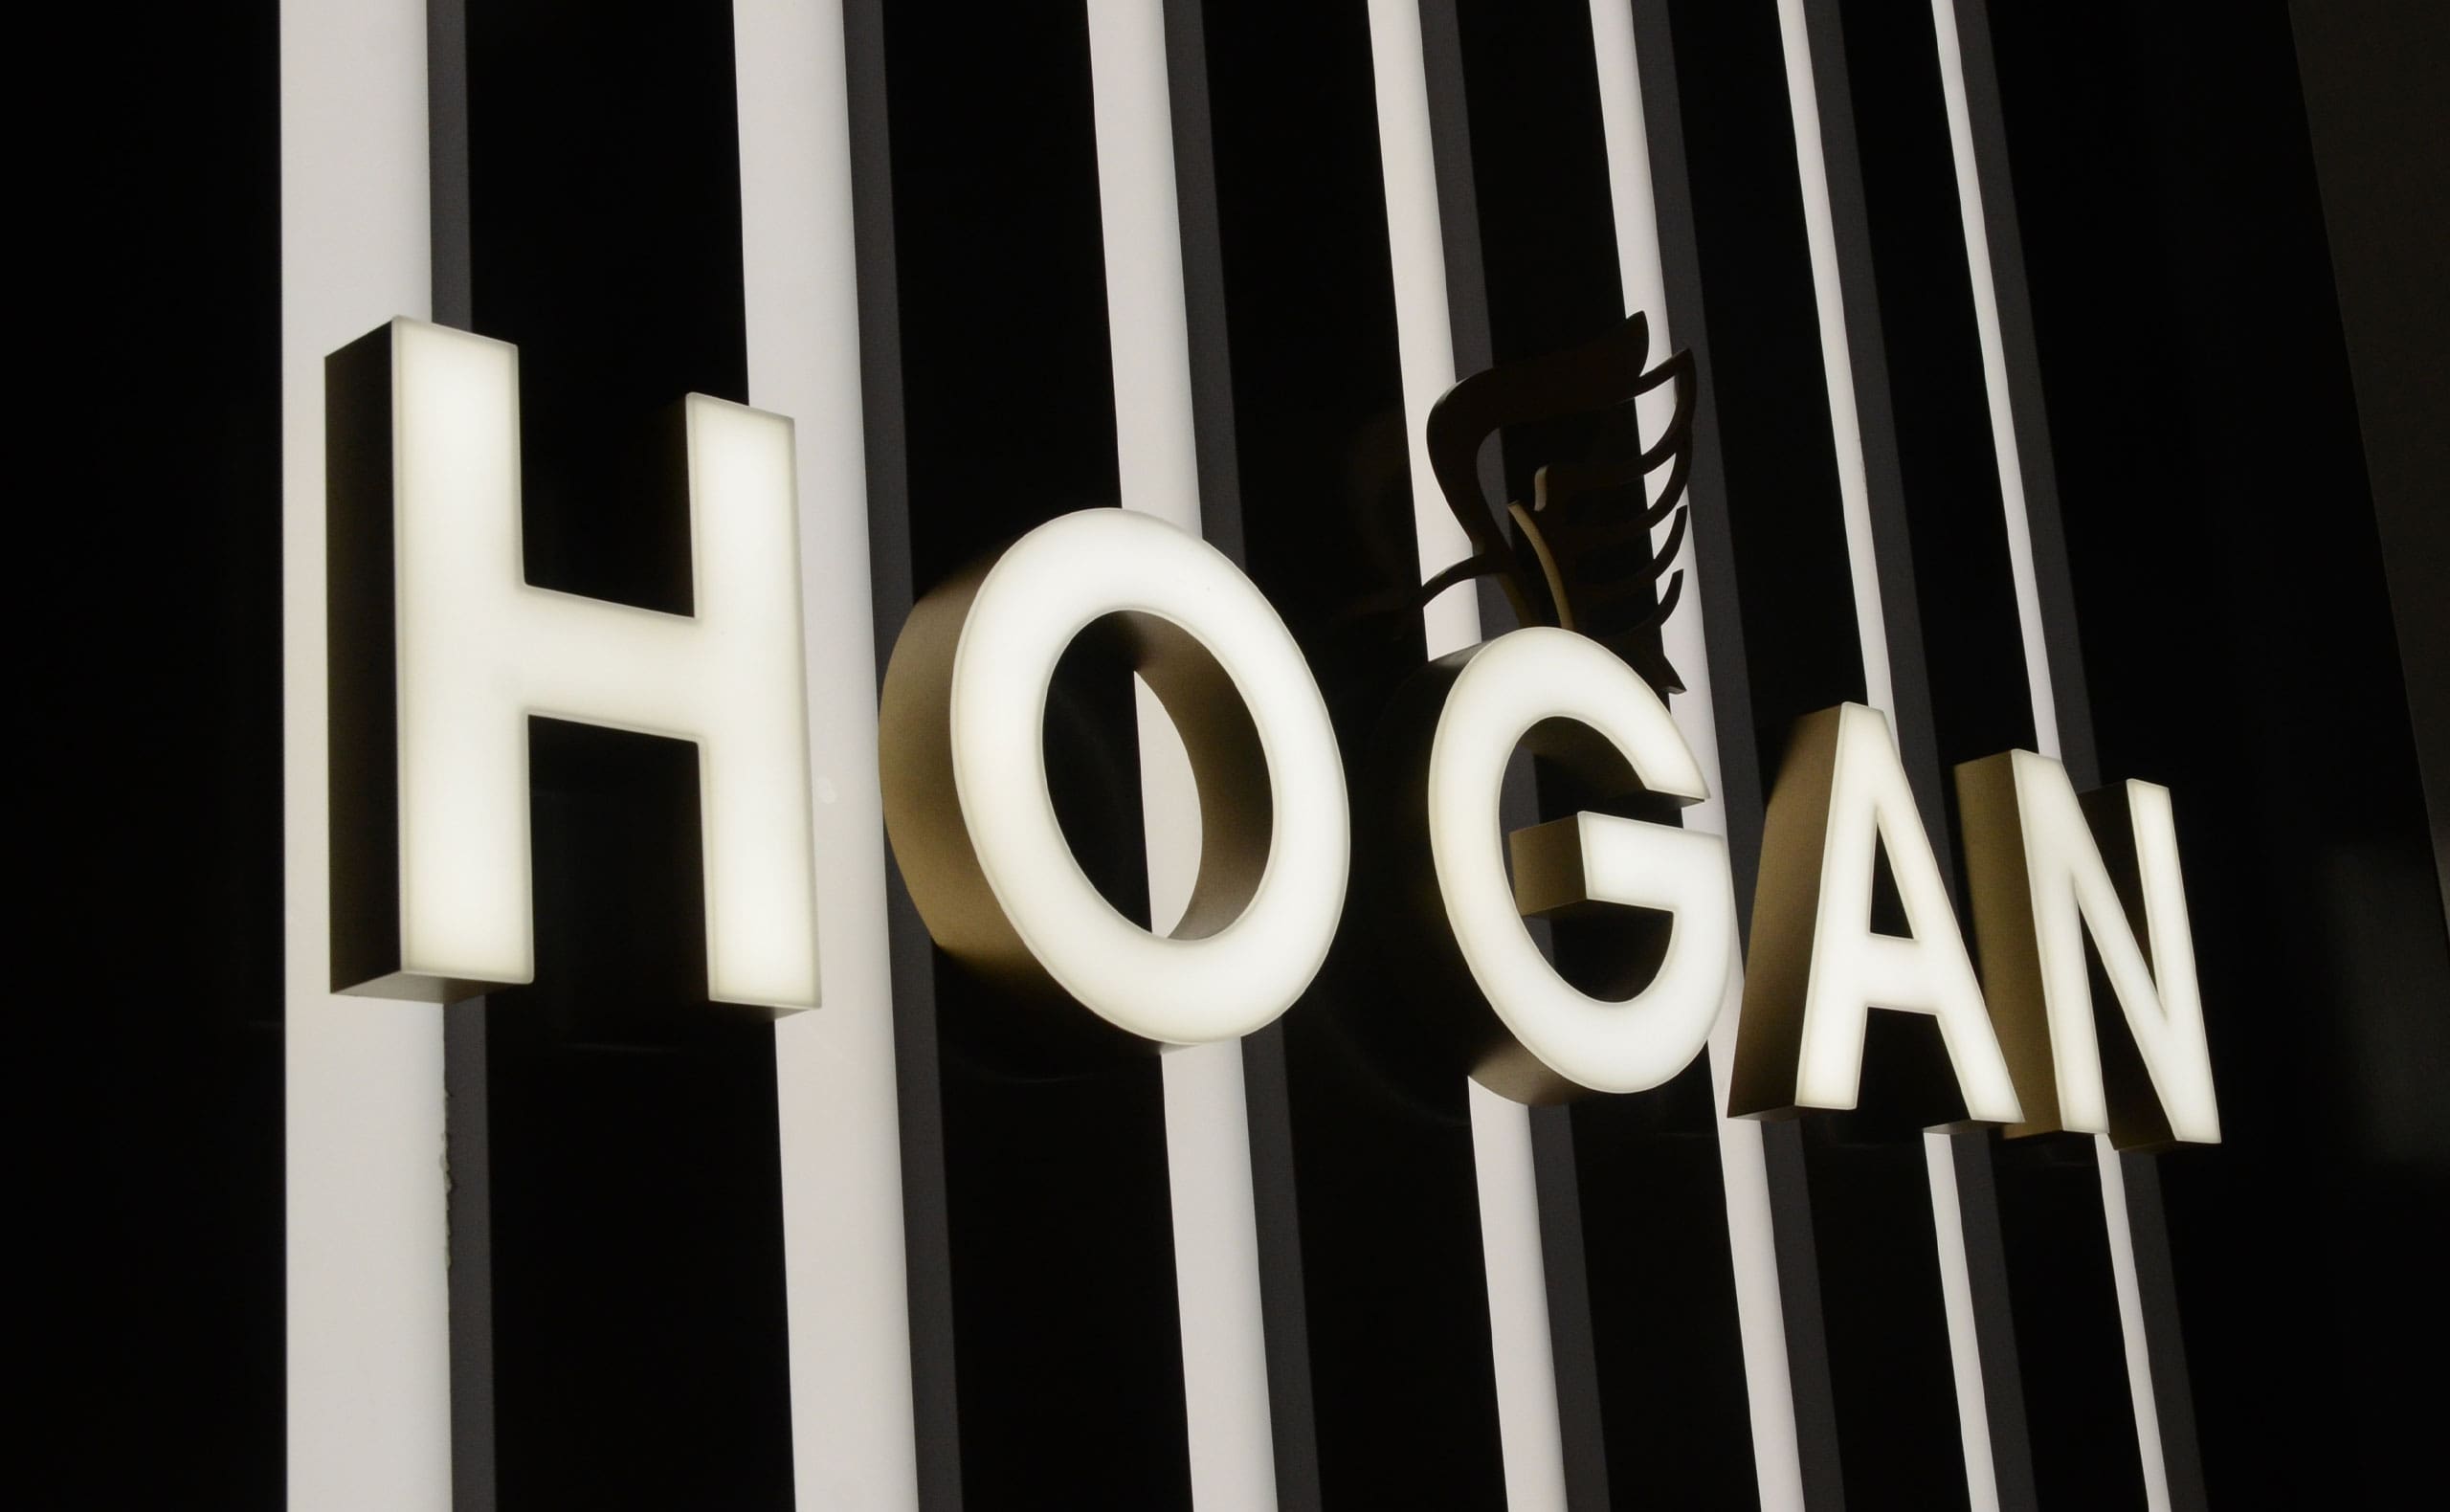 Metal Front Lit Trimless Channel Letters For Hogan